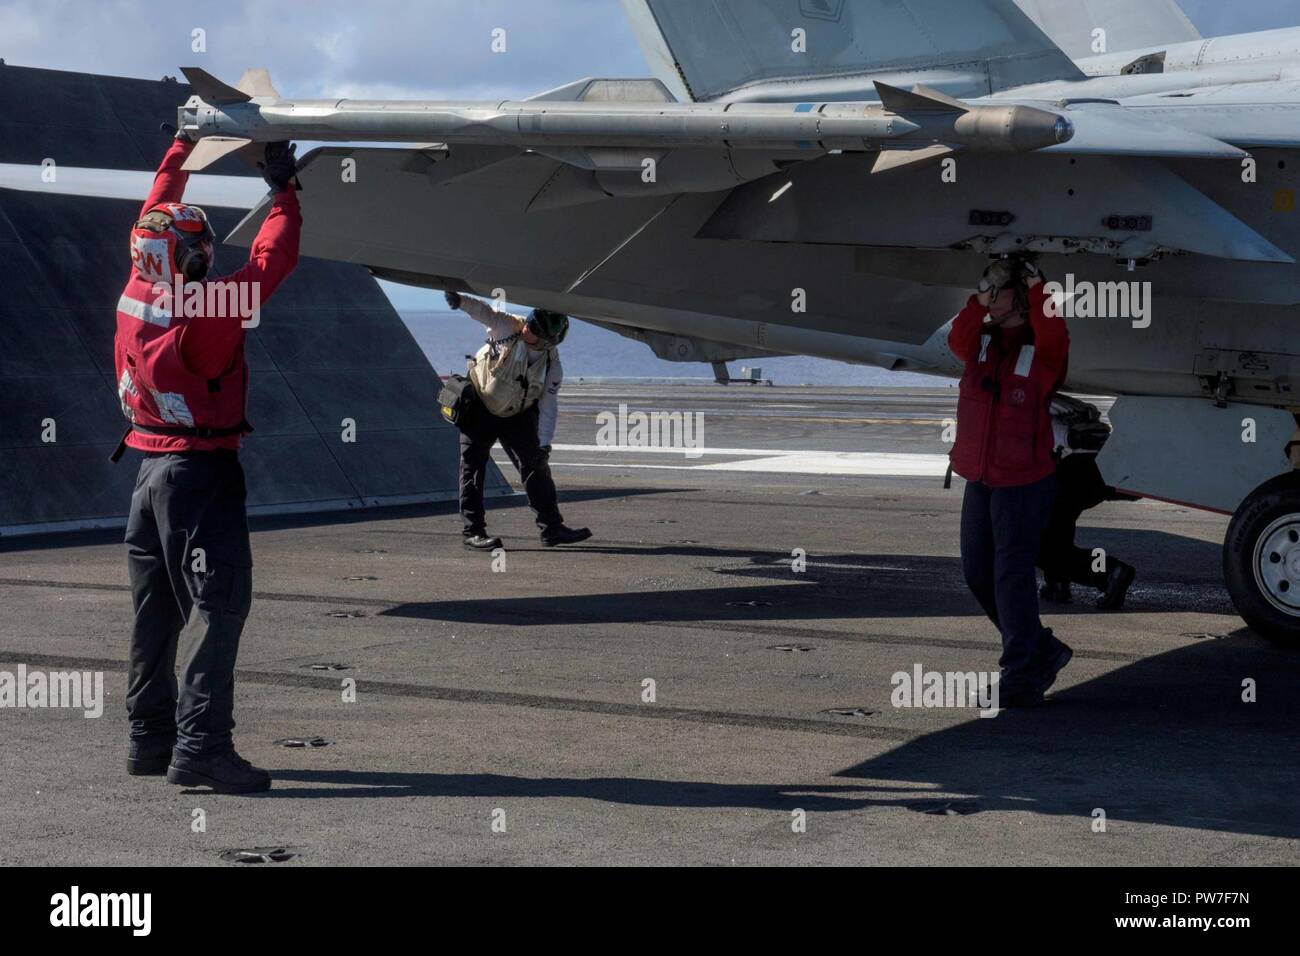 PHILIPPINE SEA (Sept. 20, 2017) Aviation Ordnancemen Qiong Wang, from Mountainview California, and Lorena Lucio, from Brownsville, Texas, inspect ordnance on an F/A-18E Super Hornet, assigned to Strike Fighter Squadron (VFA) 27, on the flight deck of the Navy's forward-deployed aircraft carrier, USS Ronald Reagan (CVN 76).  Ronald Reagan, the flagship of Carrier Strike Group 5, provides a combat-ready force that protects and defends the collective maritime interests of its allies and partners in the Indo-Asia-Pacific region. Stock Photo